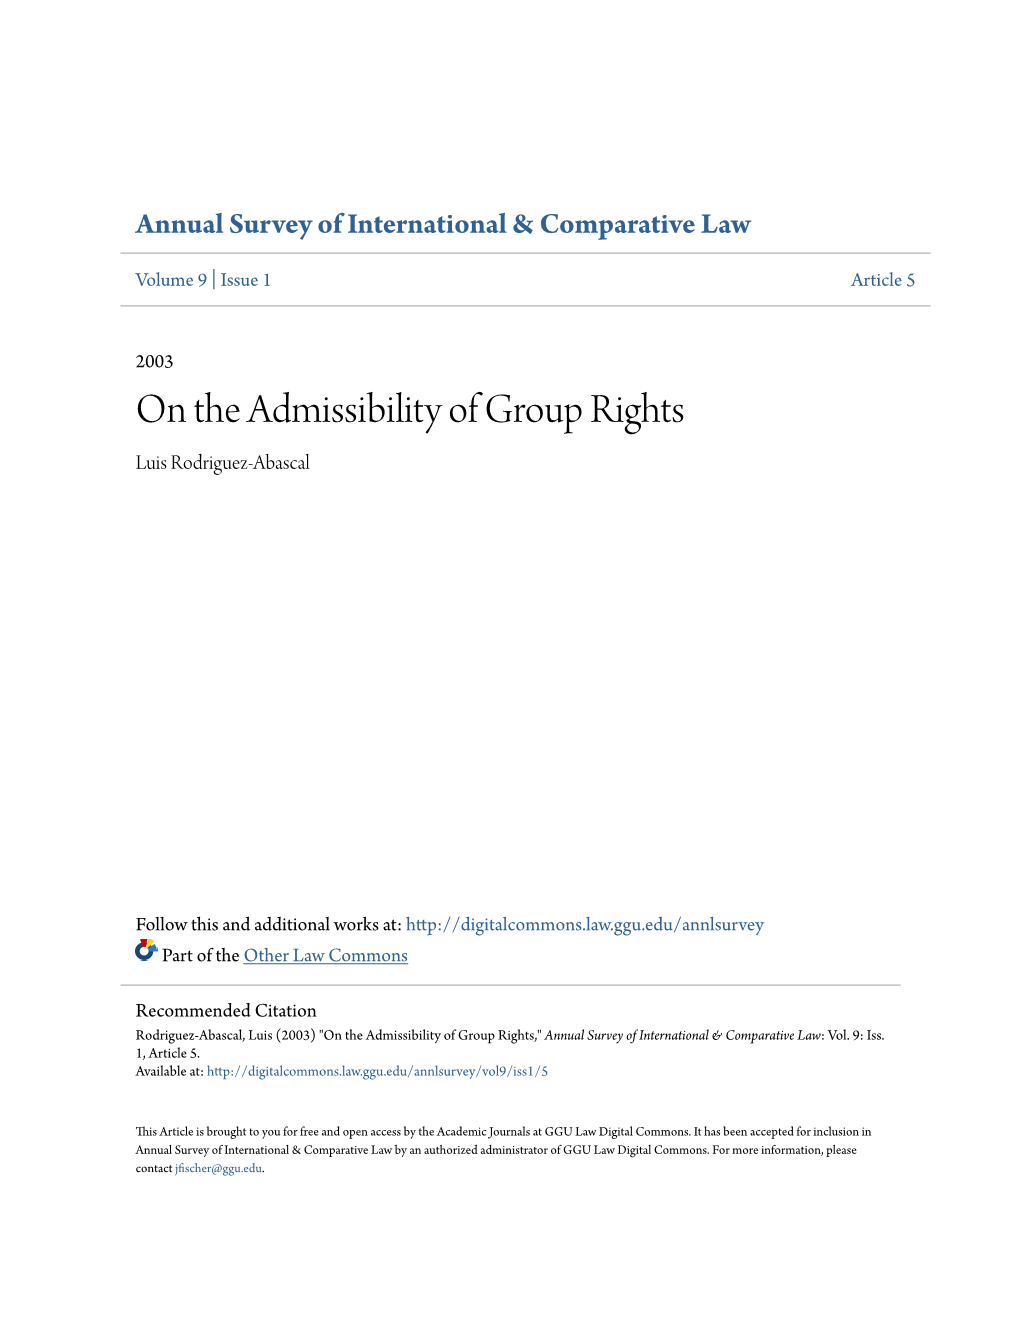 On the Admissibility of Group Rights Luis Rodriguez-Abascal